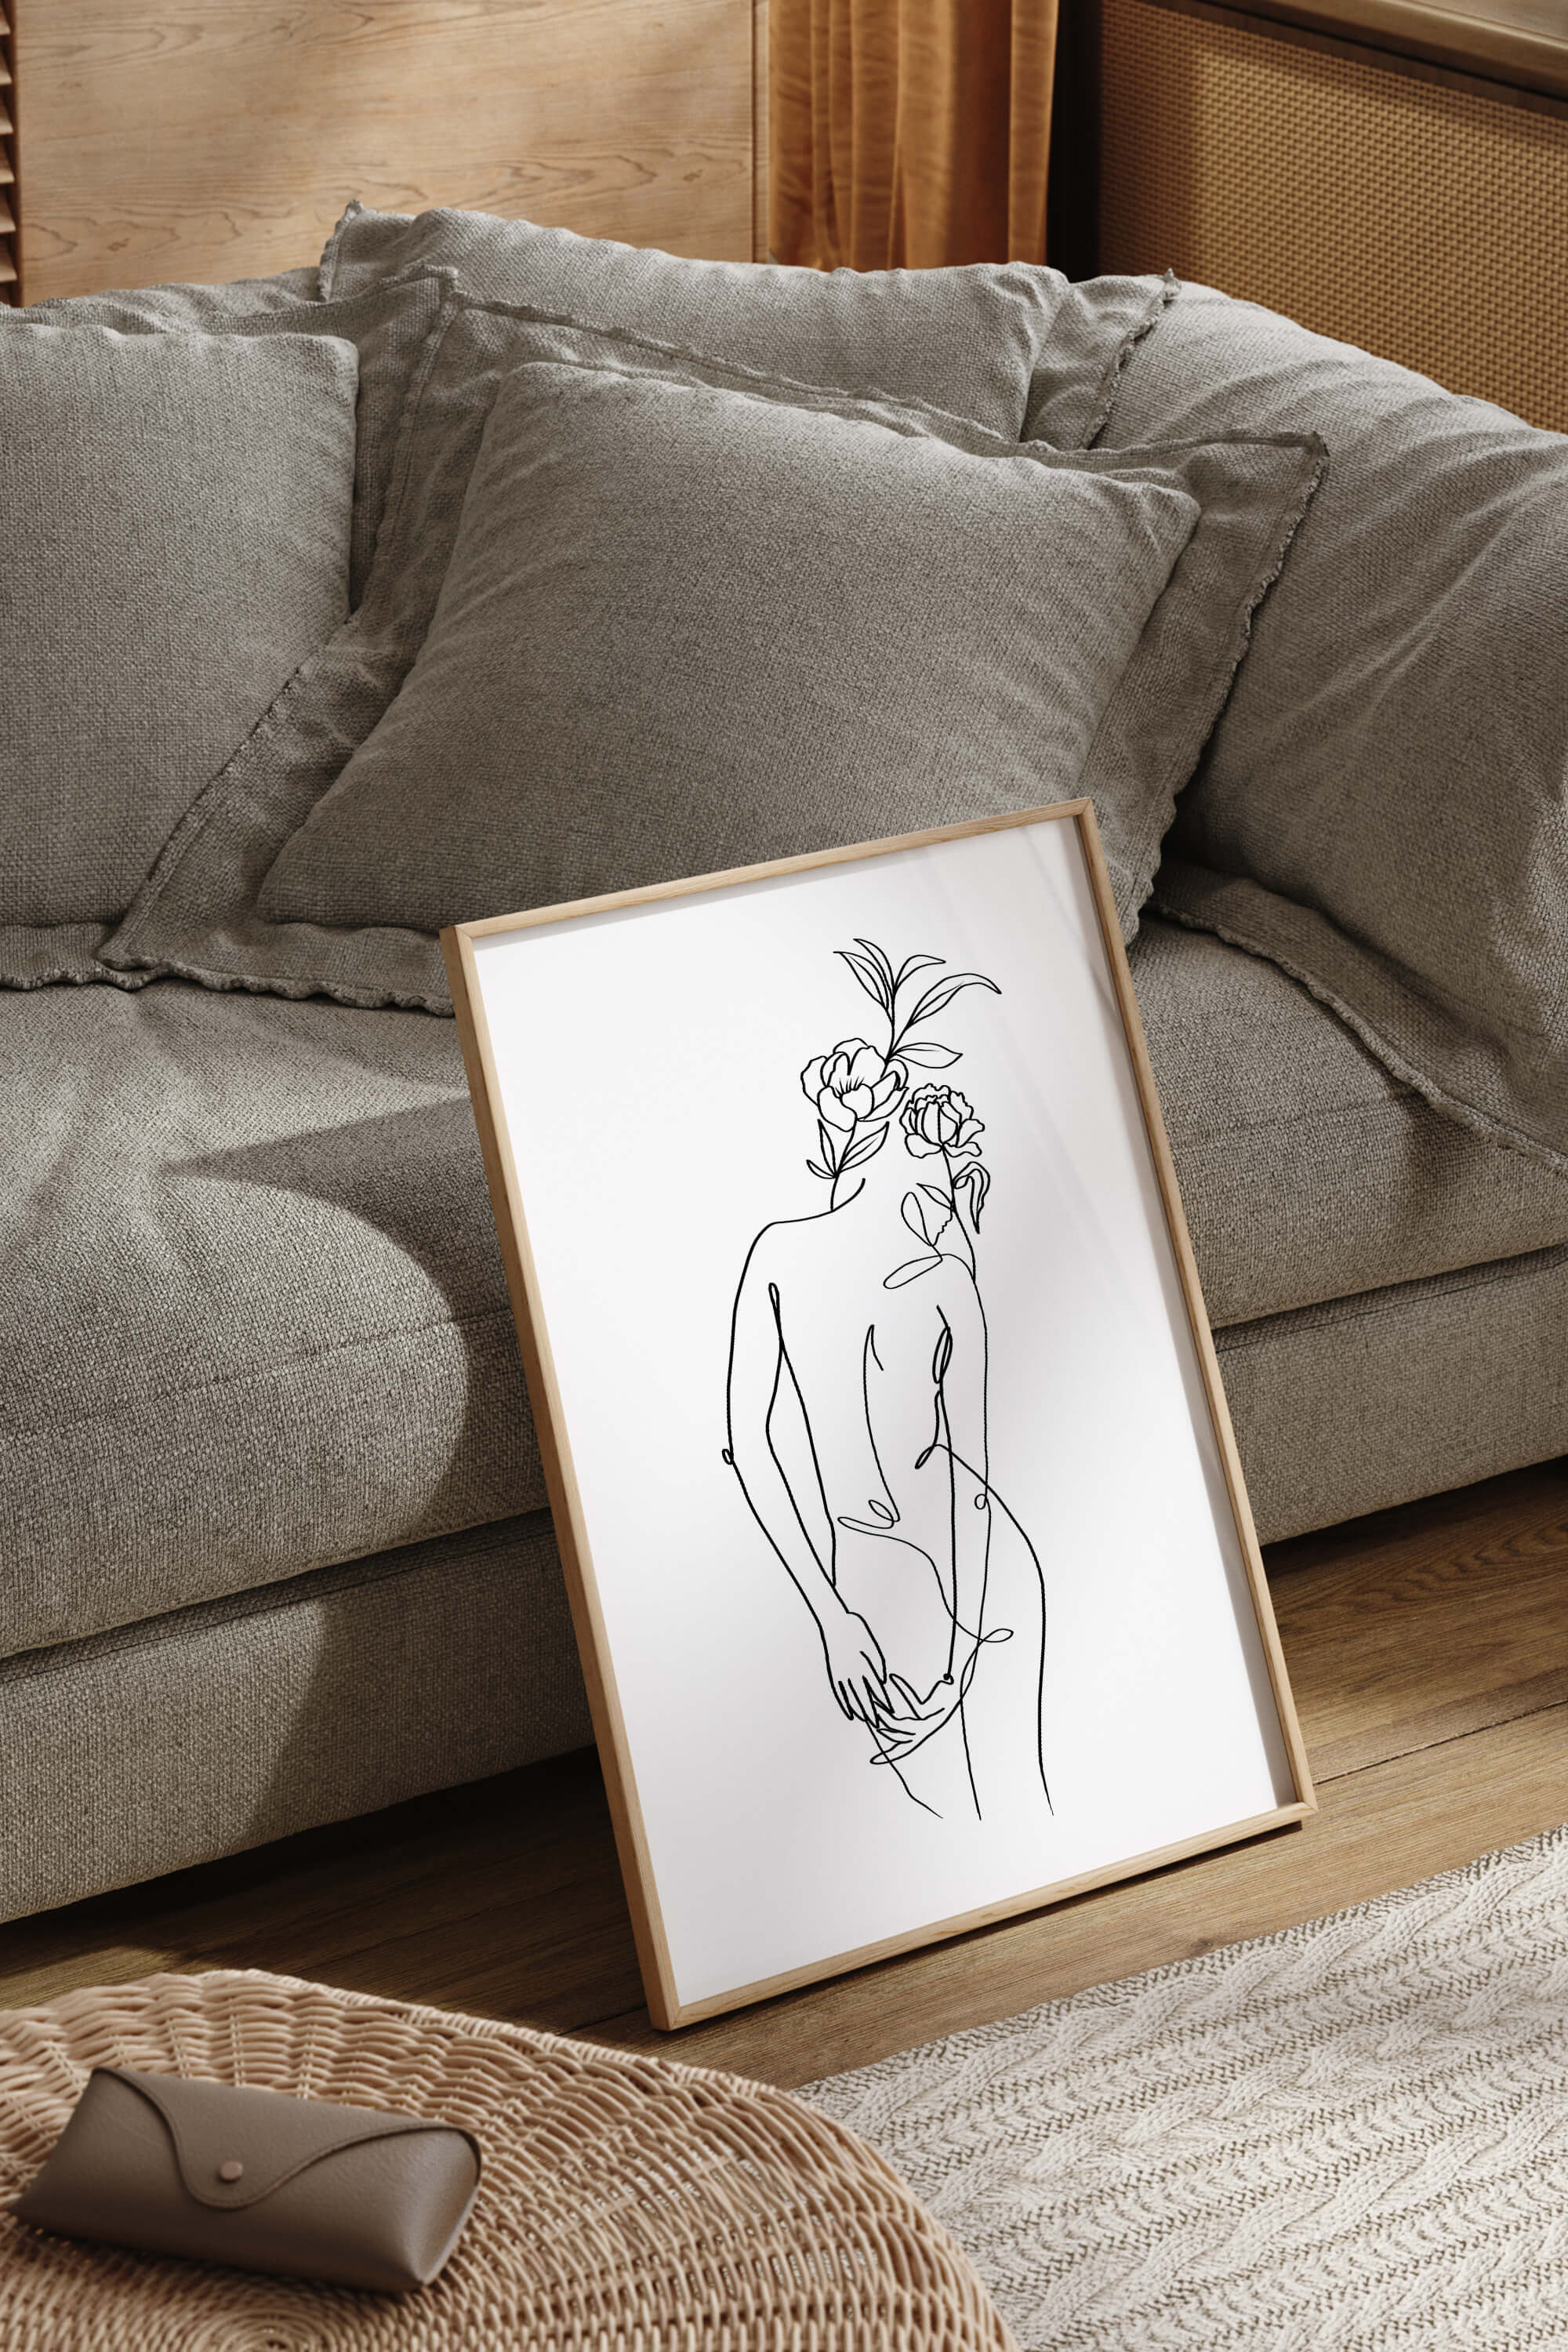 A monochrome drawing of a nude female back, intricately detailed to evoke emotions and admiration. The lines speak volumes, creating a visual narrative that invites viewers to explore the depths of beauty and expression.